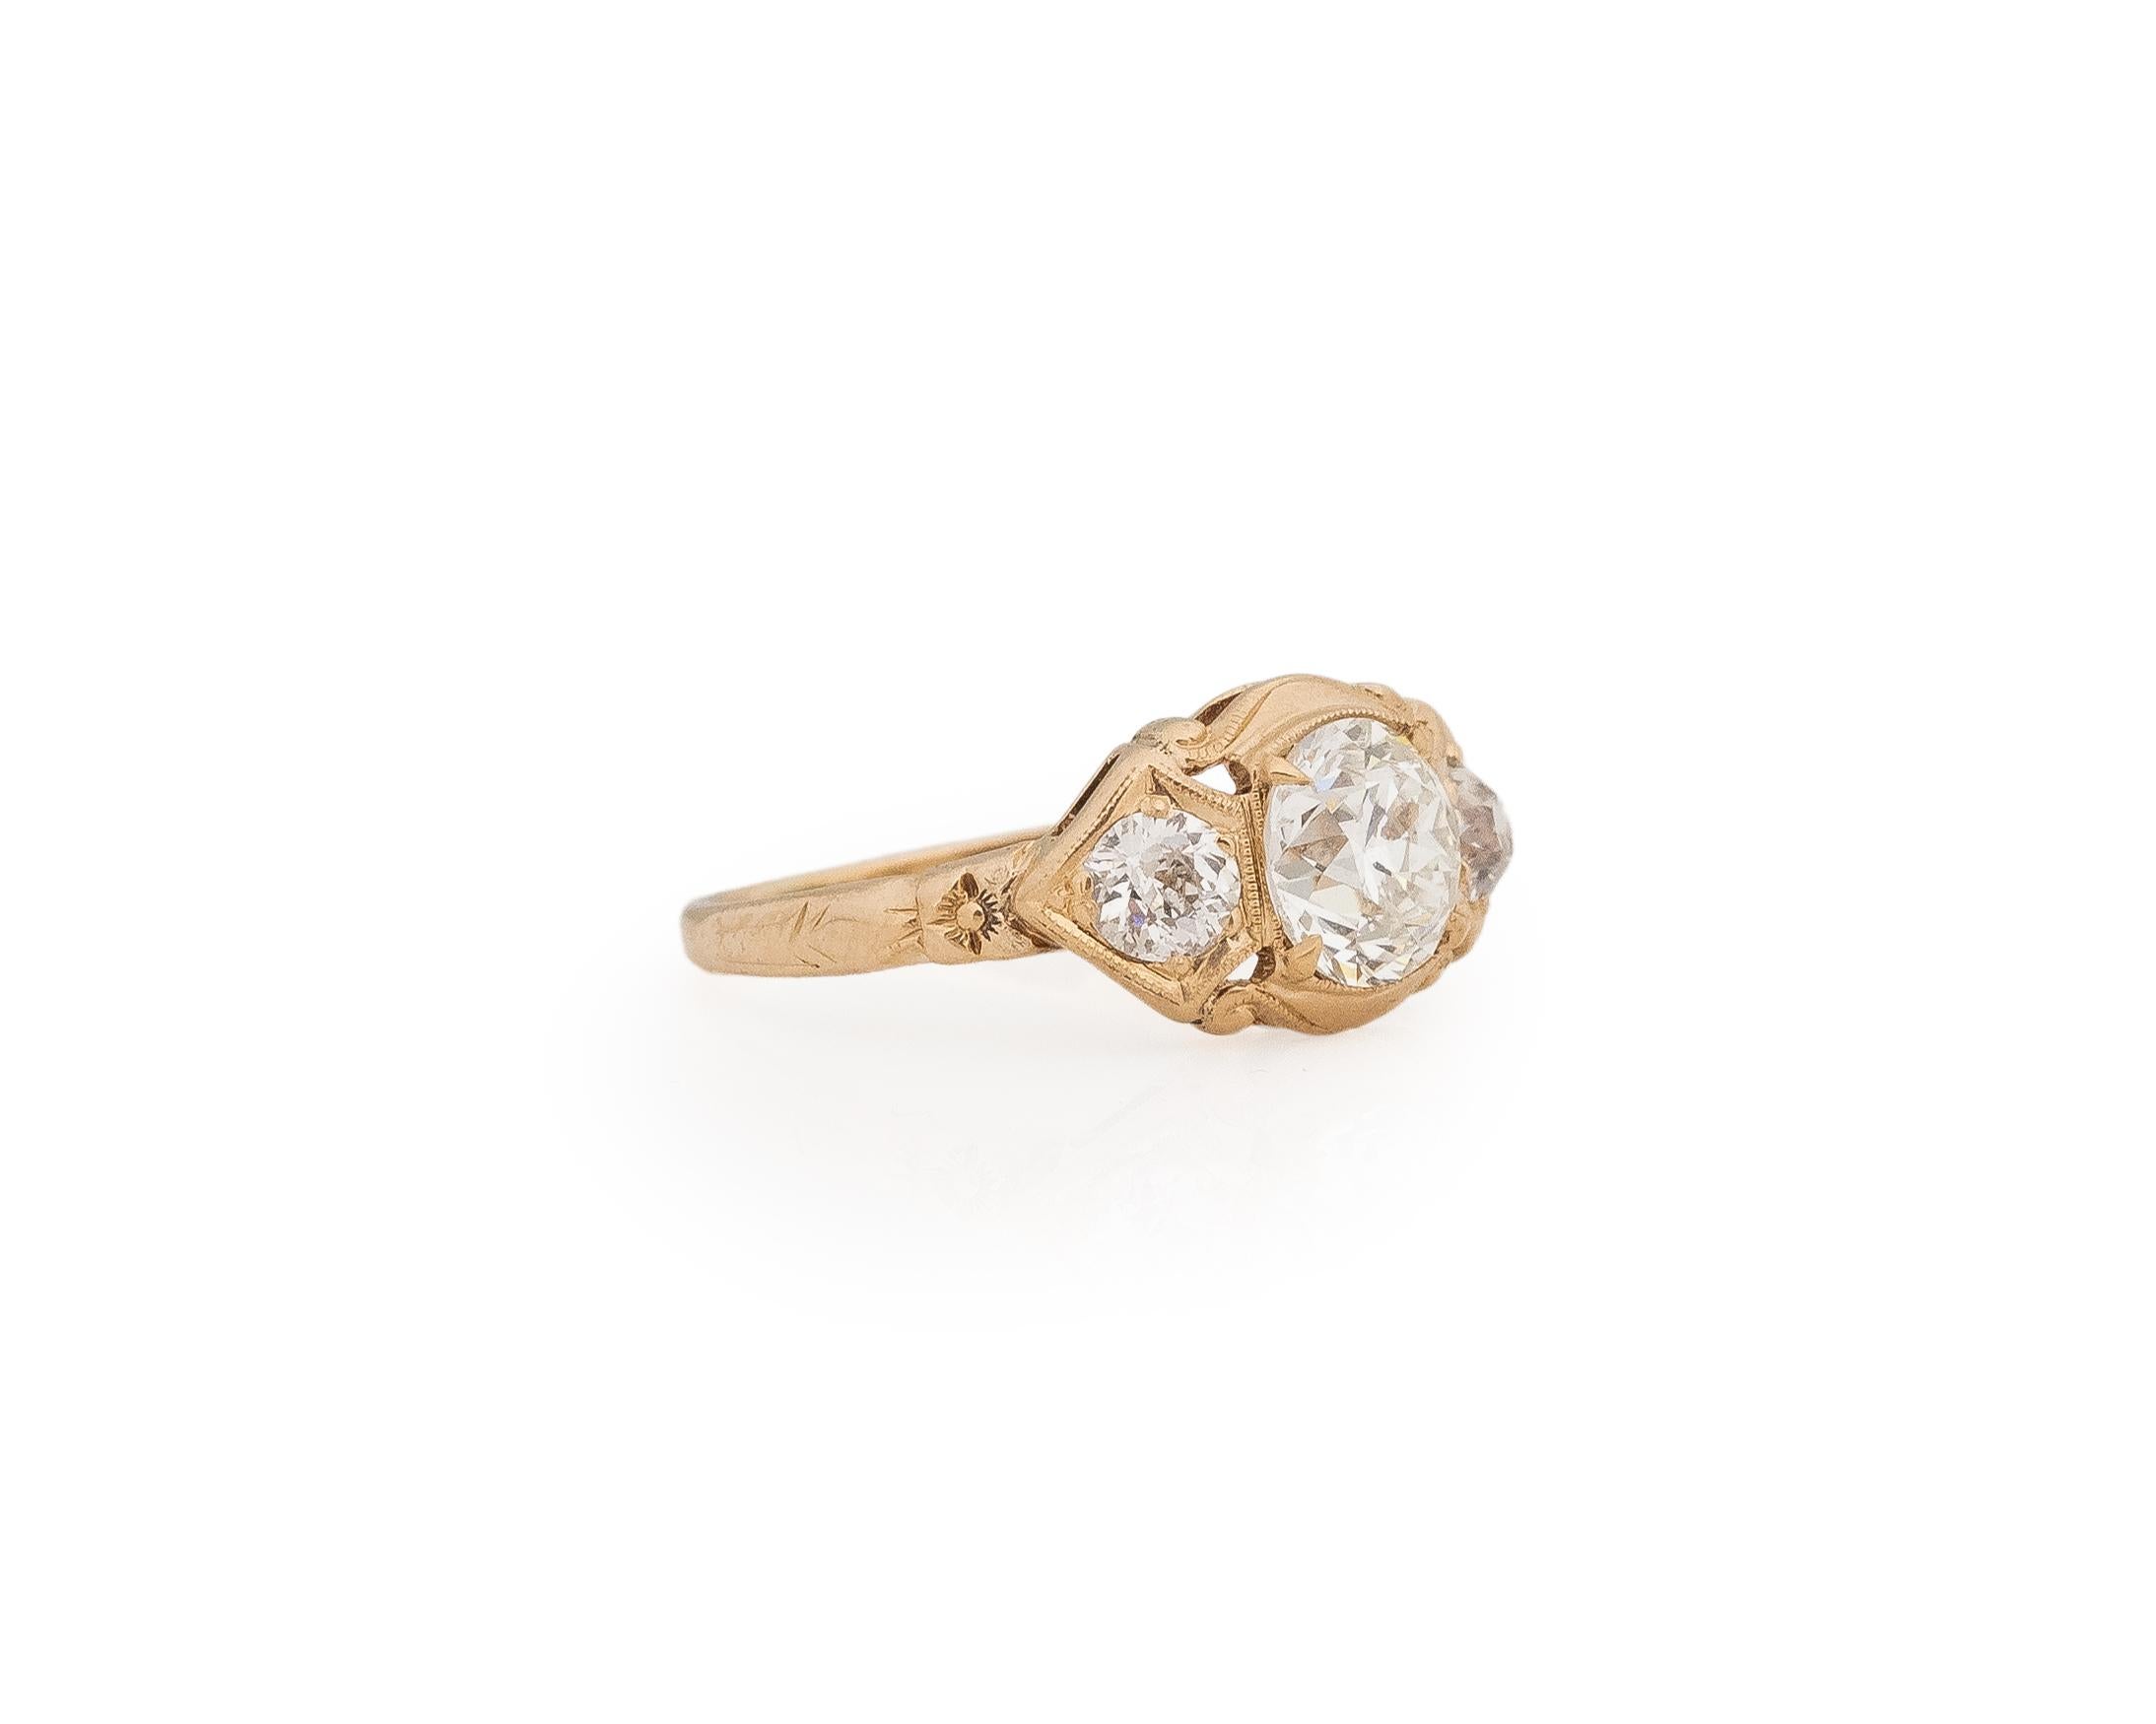 Year: 1910s

Item Details:
Ring Size: 4
Metal Type: 14K Yellow Gold [Hallmarked, and Tested]
Weight: 1.8 grams

Diamond Details:

GIA Report#: 2223834079
Weight: .87ct total weight
Cut: Old European brilliant
Color: G
Clarity: SI1
Type: